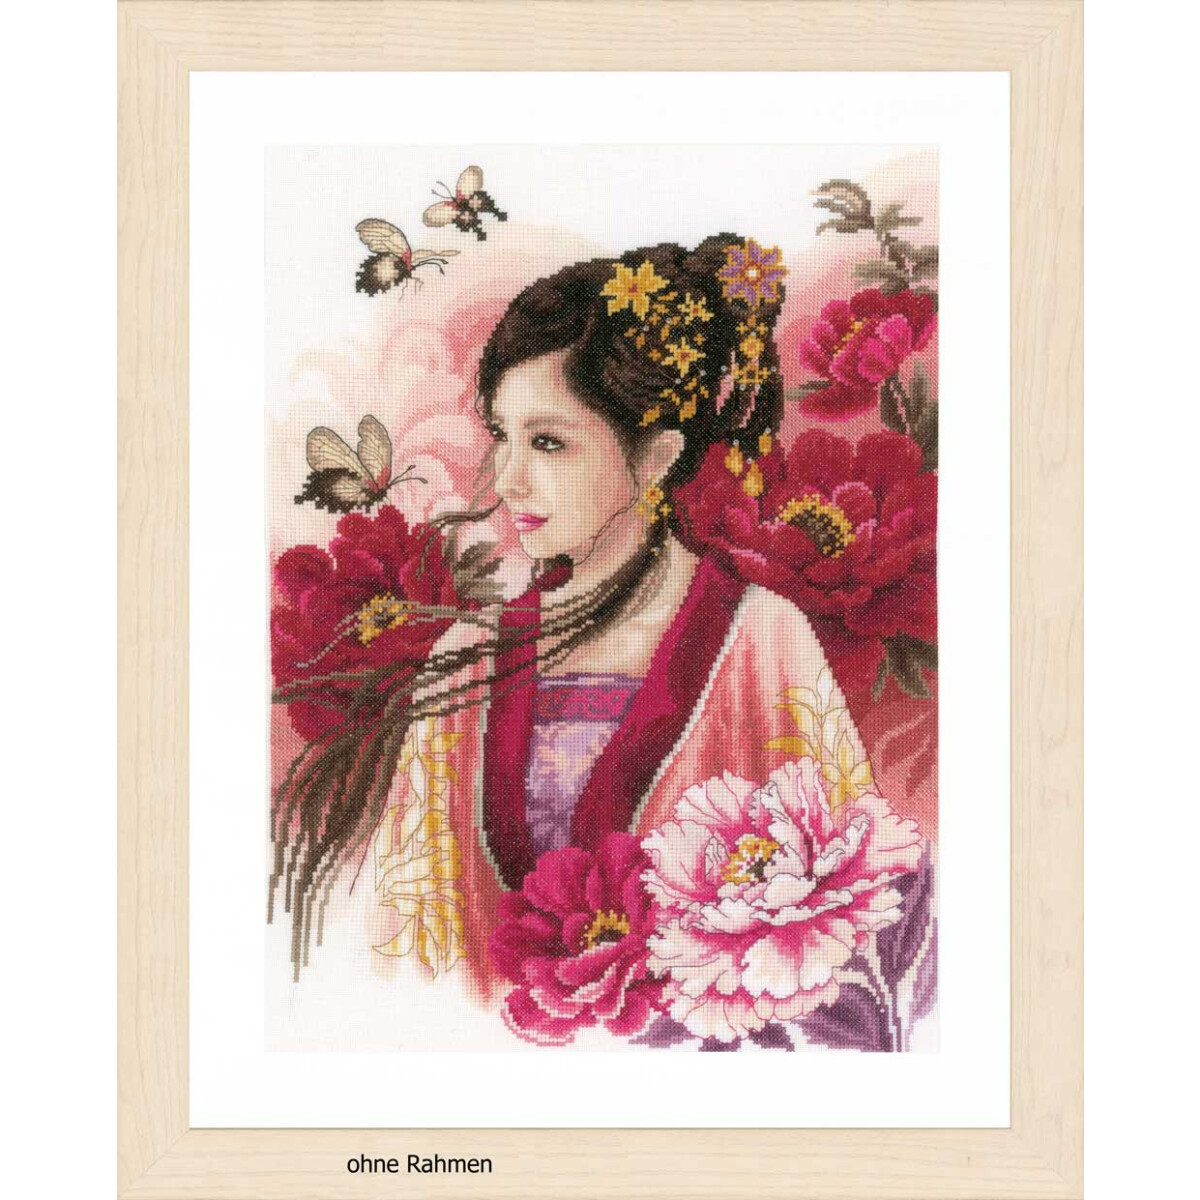 An embroidery pack from Lanarte with a woman with flowers...